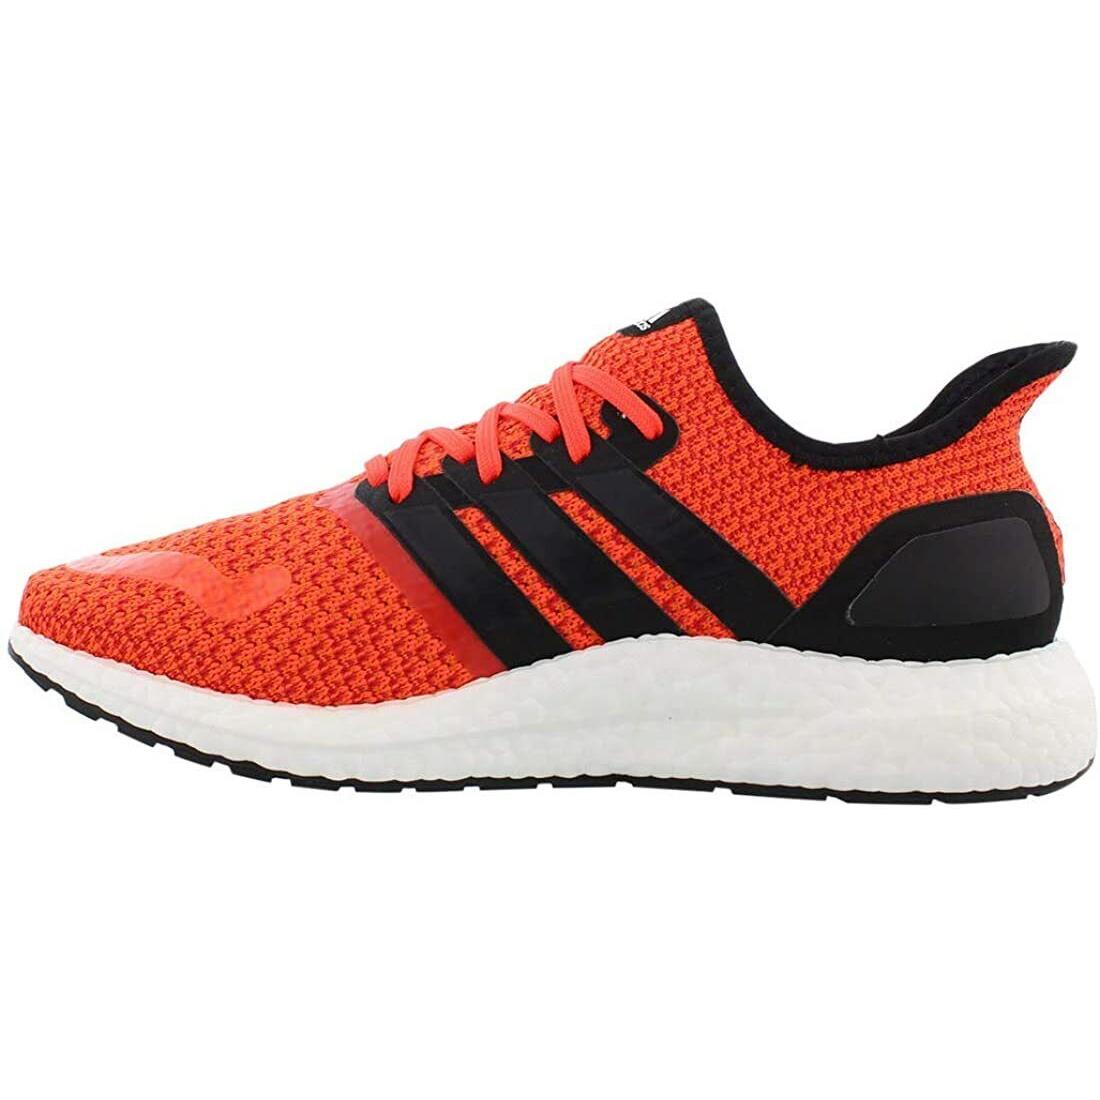 Adidas shoes UltraBoost - Solar red 0